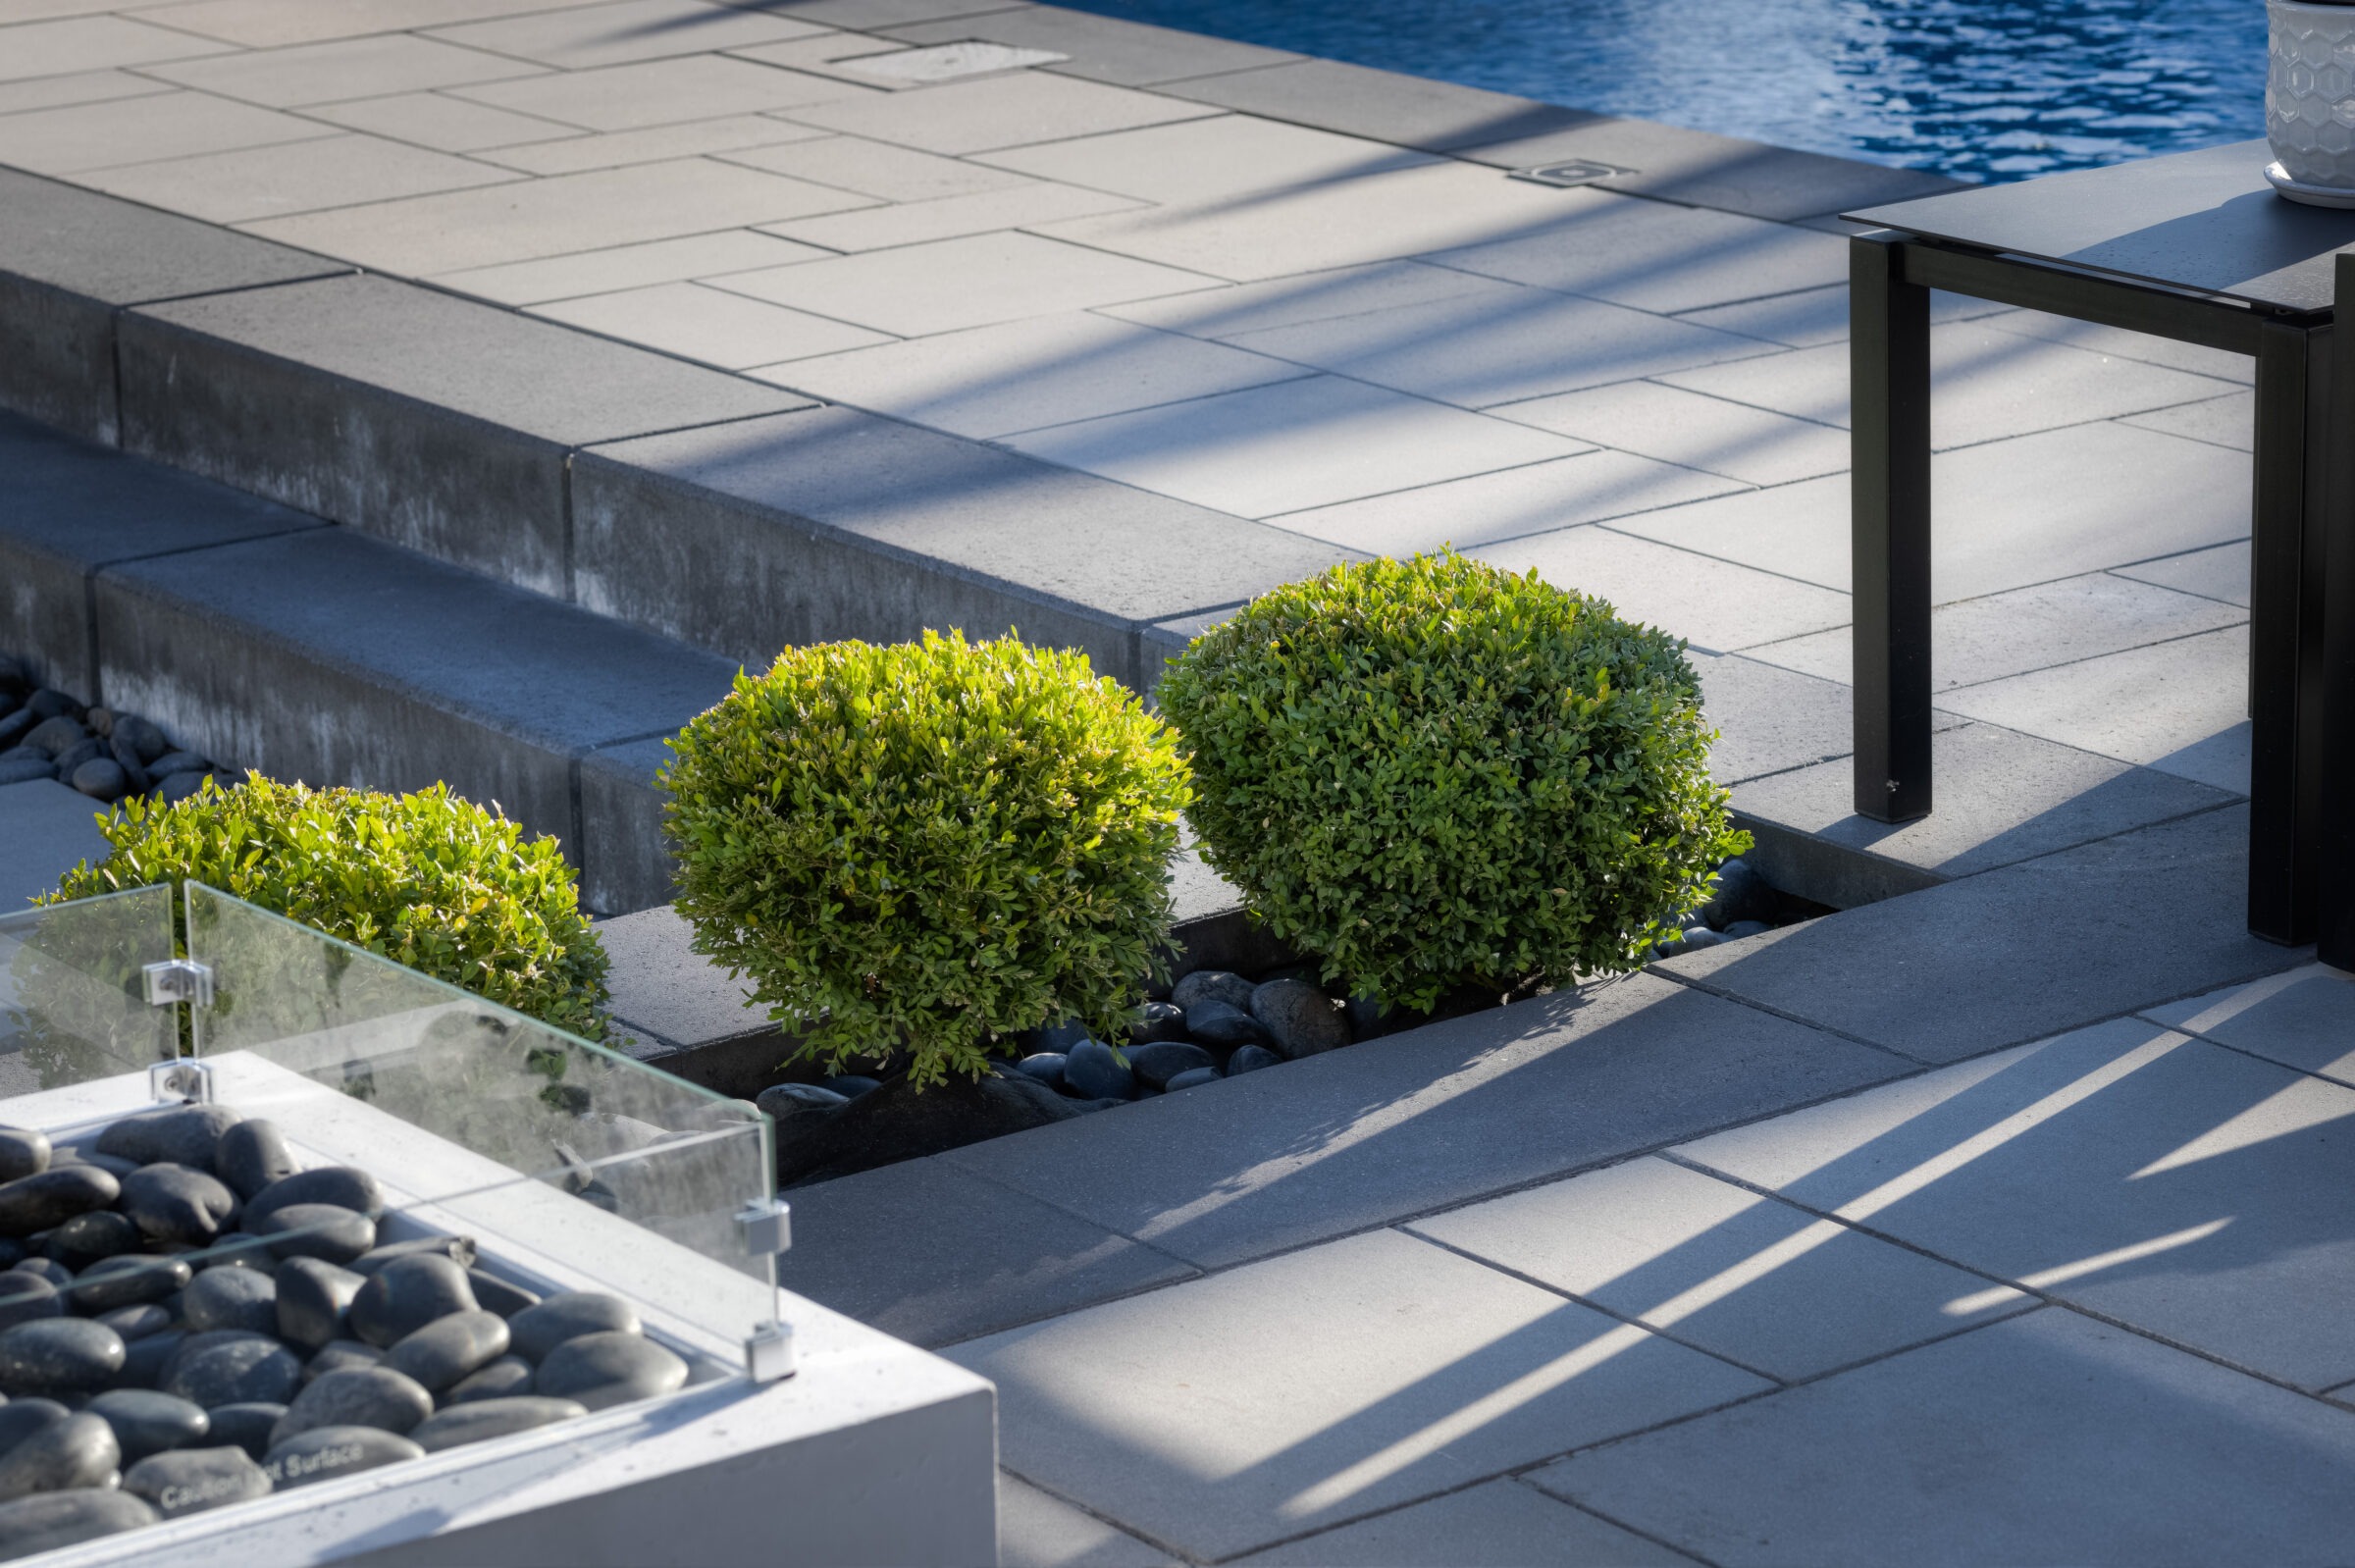 The image shows a modern outdoor space with neatly trimmed bushes, smooth paving stones, a glass barrier, and shadows indicating sunny weather.